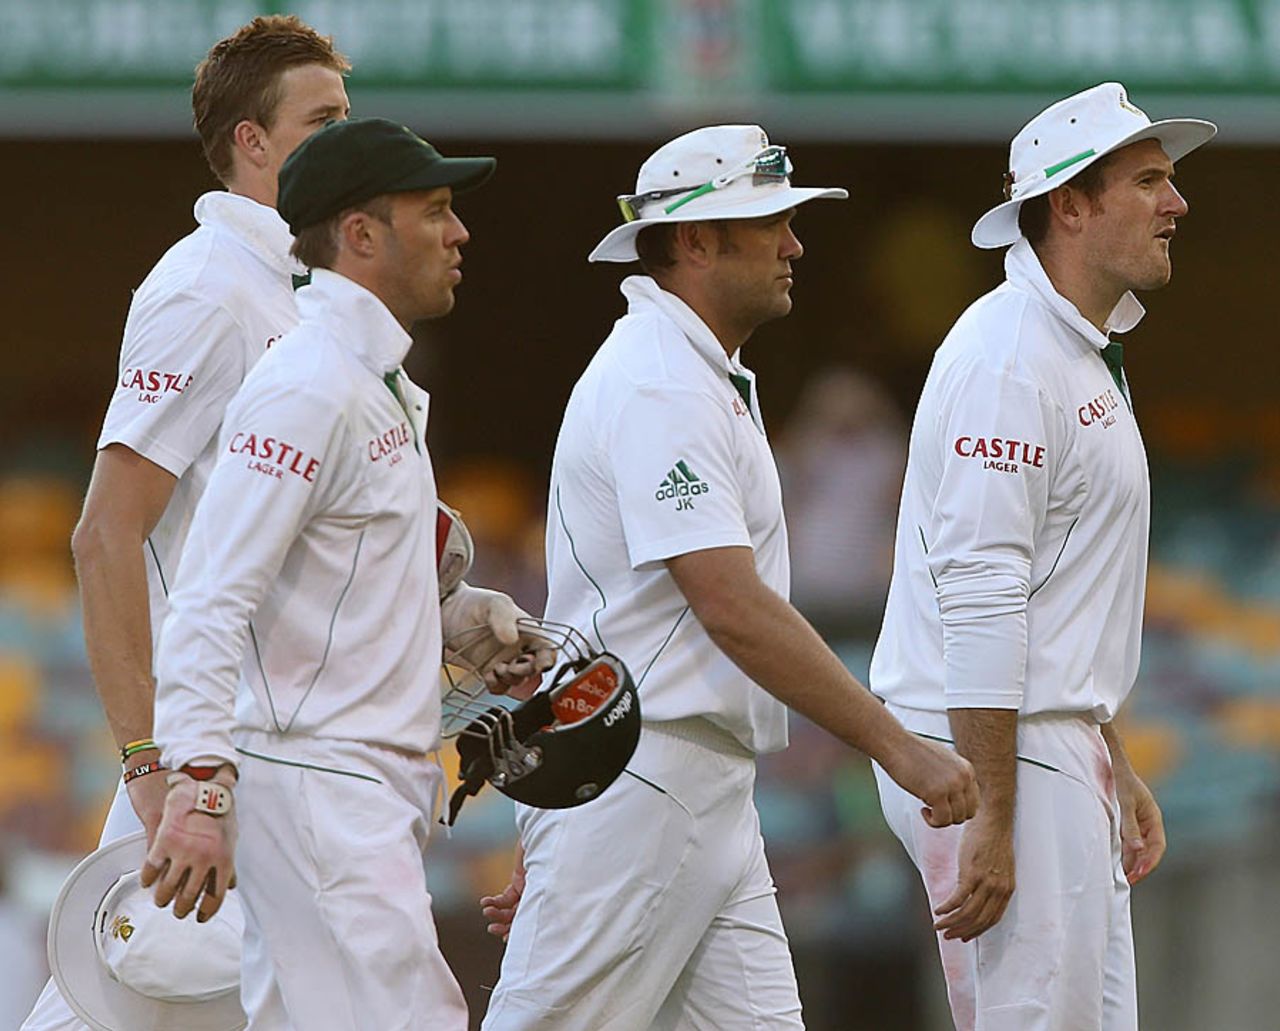 South Africa didn't have a successful fourth day, Australia v South Africa, 1st Test, 4th day, Brisbane, November 12, 2012